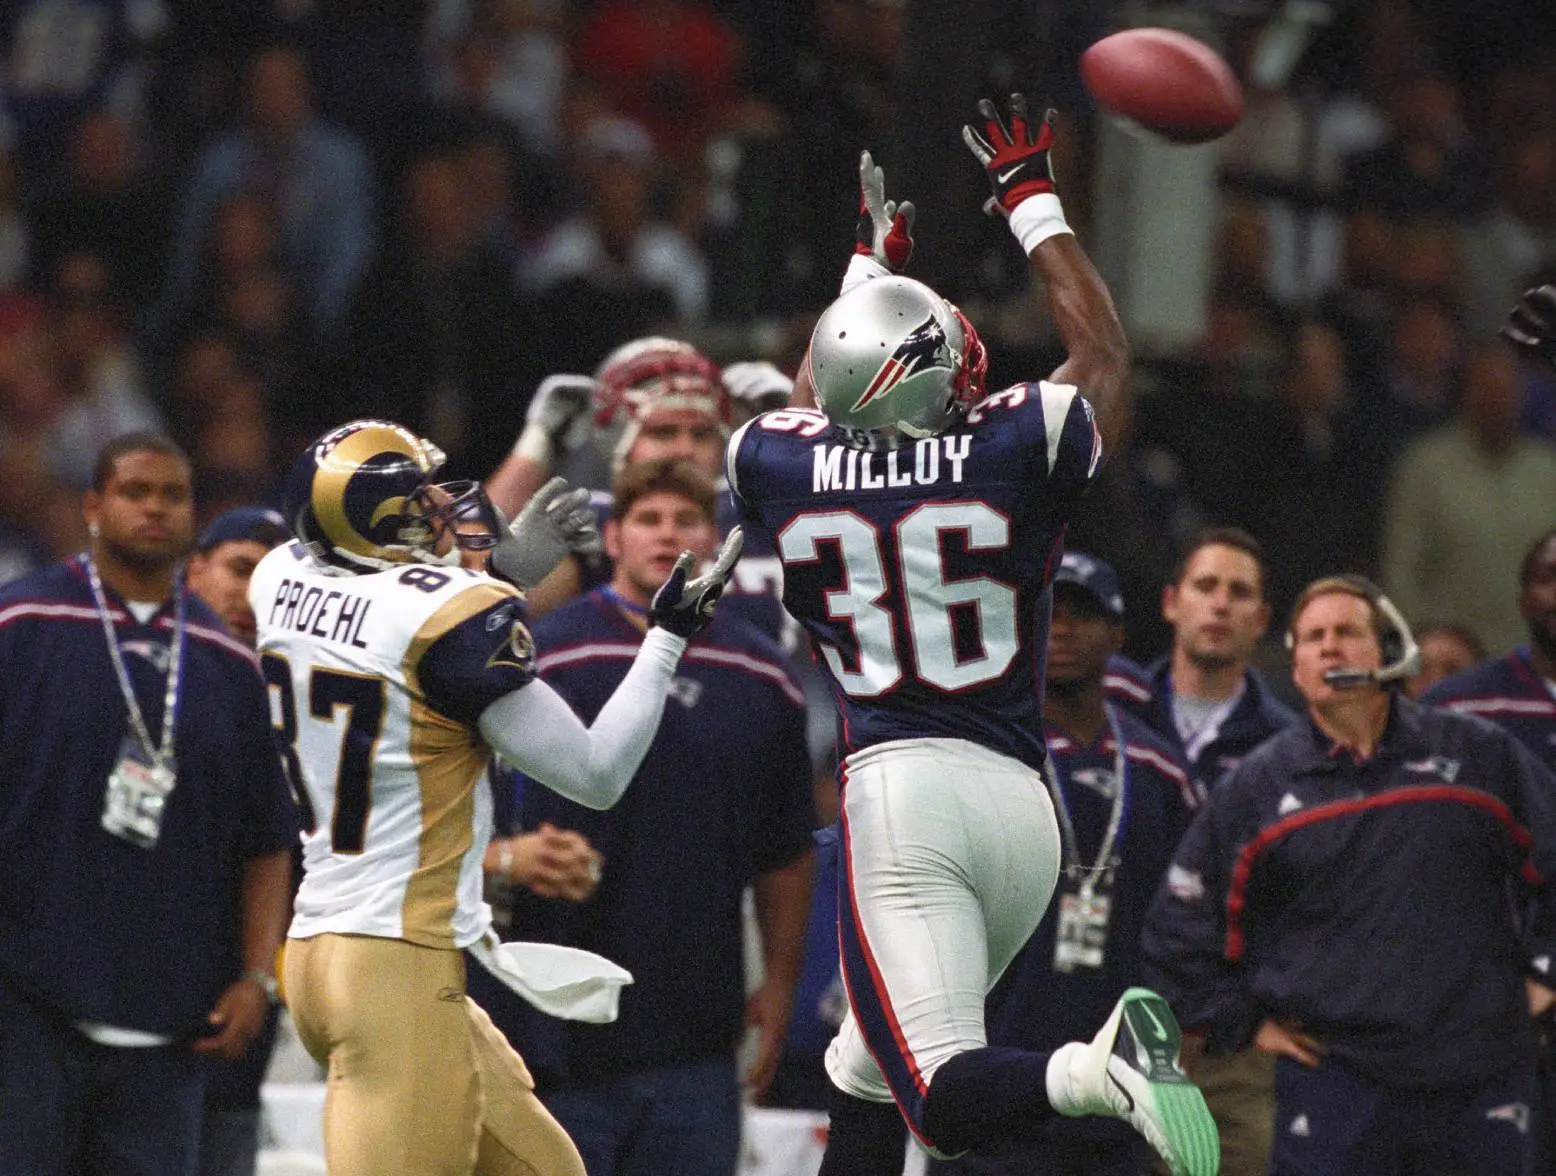 Feb 3, 2002; New Orleans, LA, USA; New England Patriots defensive back Lawyer Milloy (36) and St. Louis Rams receiver Ricky Proehl (87) go up for a pass during Super Bowl XXXVI at the Louisiana Superdome. The Patriots defeated the Rams 20-17. Credit: USA TODAY Sports